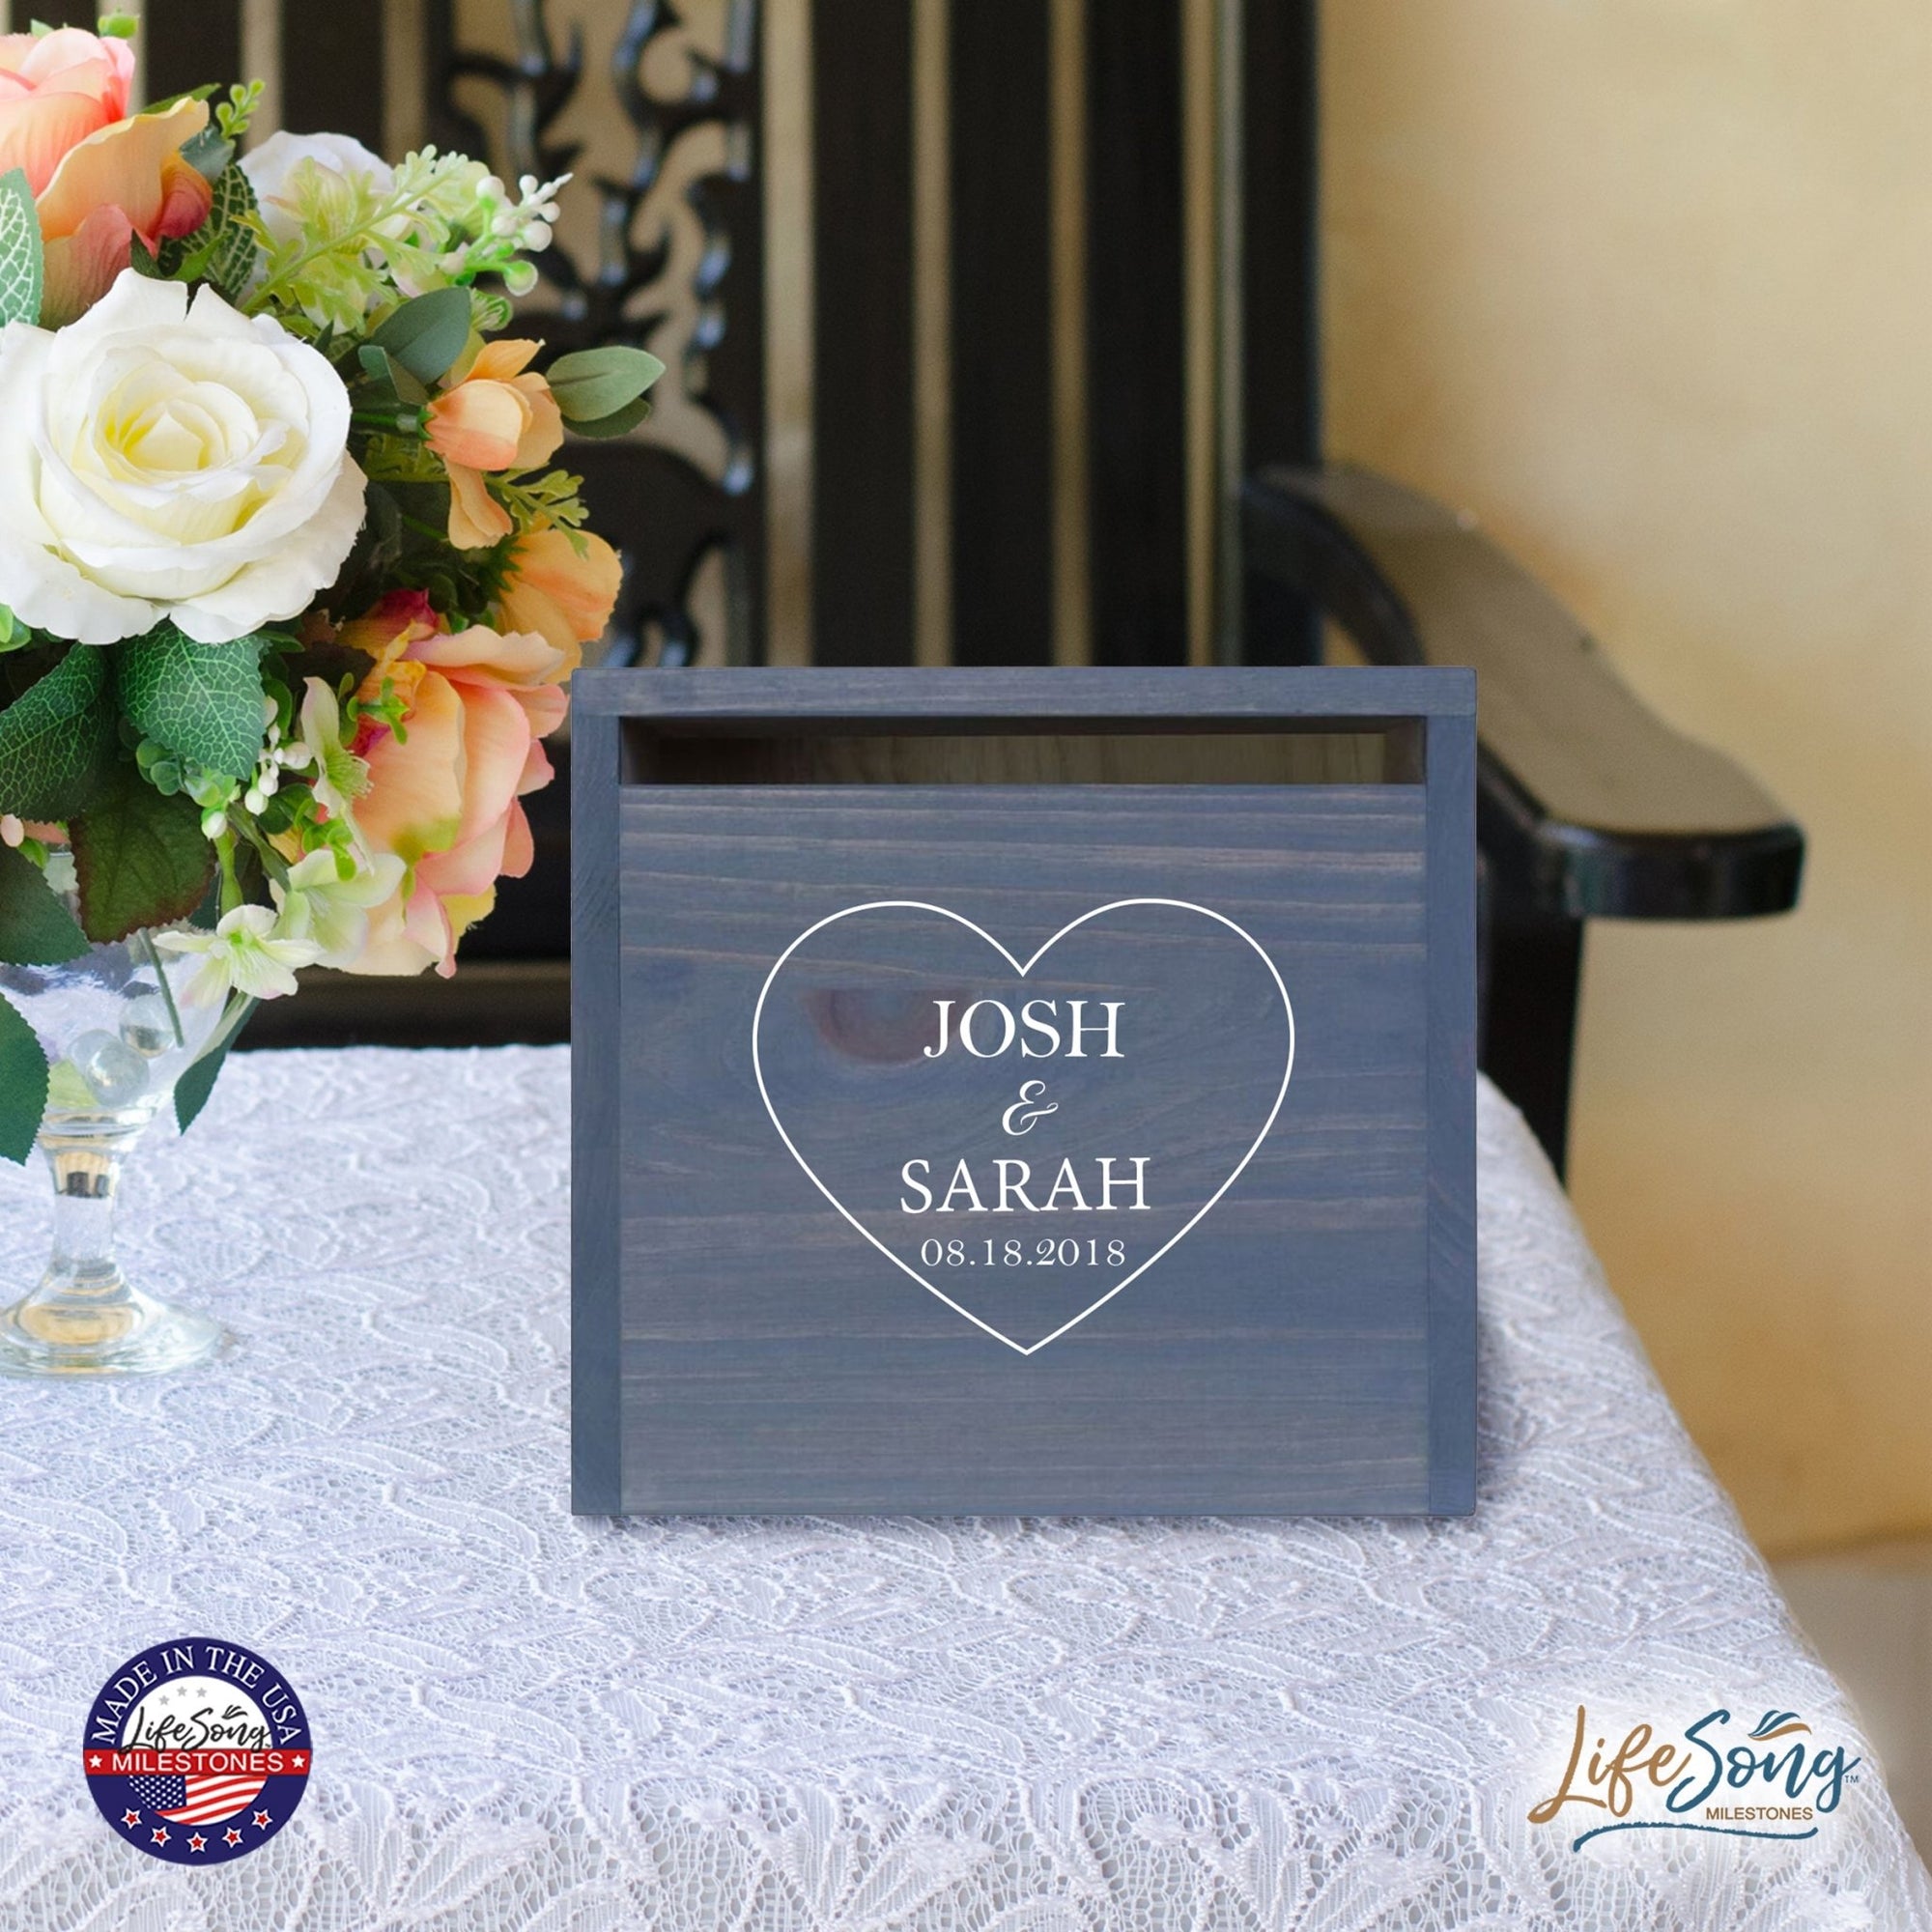 Personalized Wooden Card Box for Wedding Ceremonies, Venues, Receptions, Bridal Showers, and Engagement Parties 13.5x12 - Josh & Sarah (Heart) - LifeSong Milestones